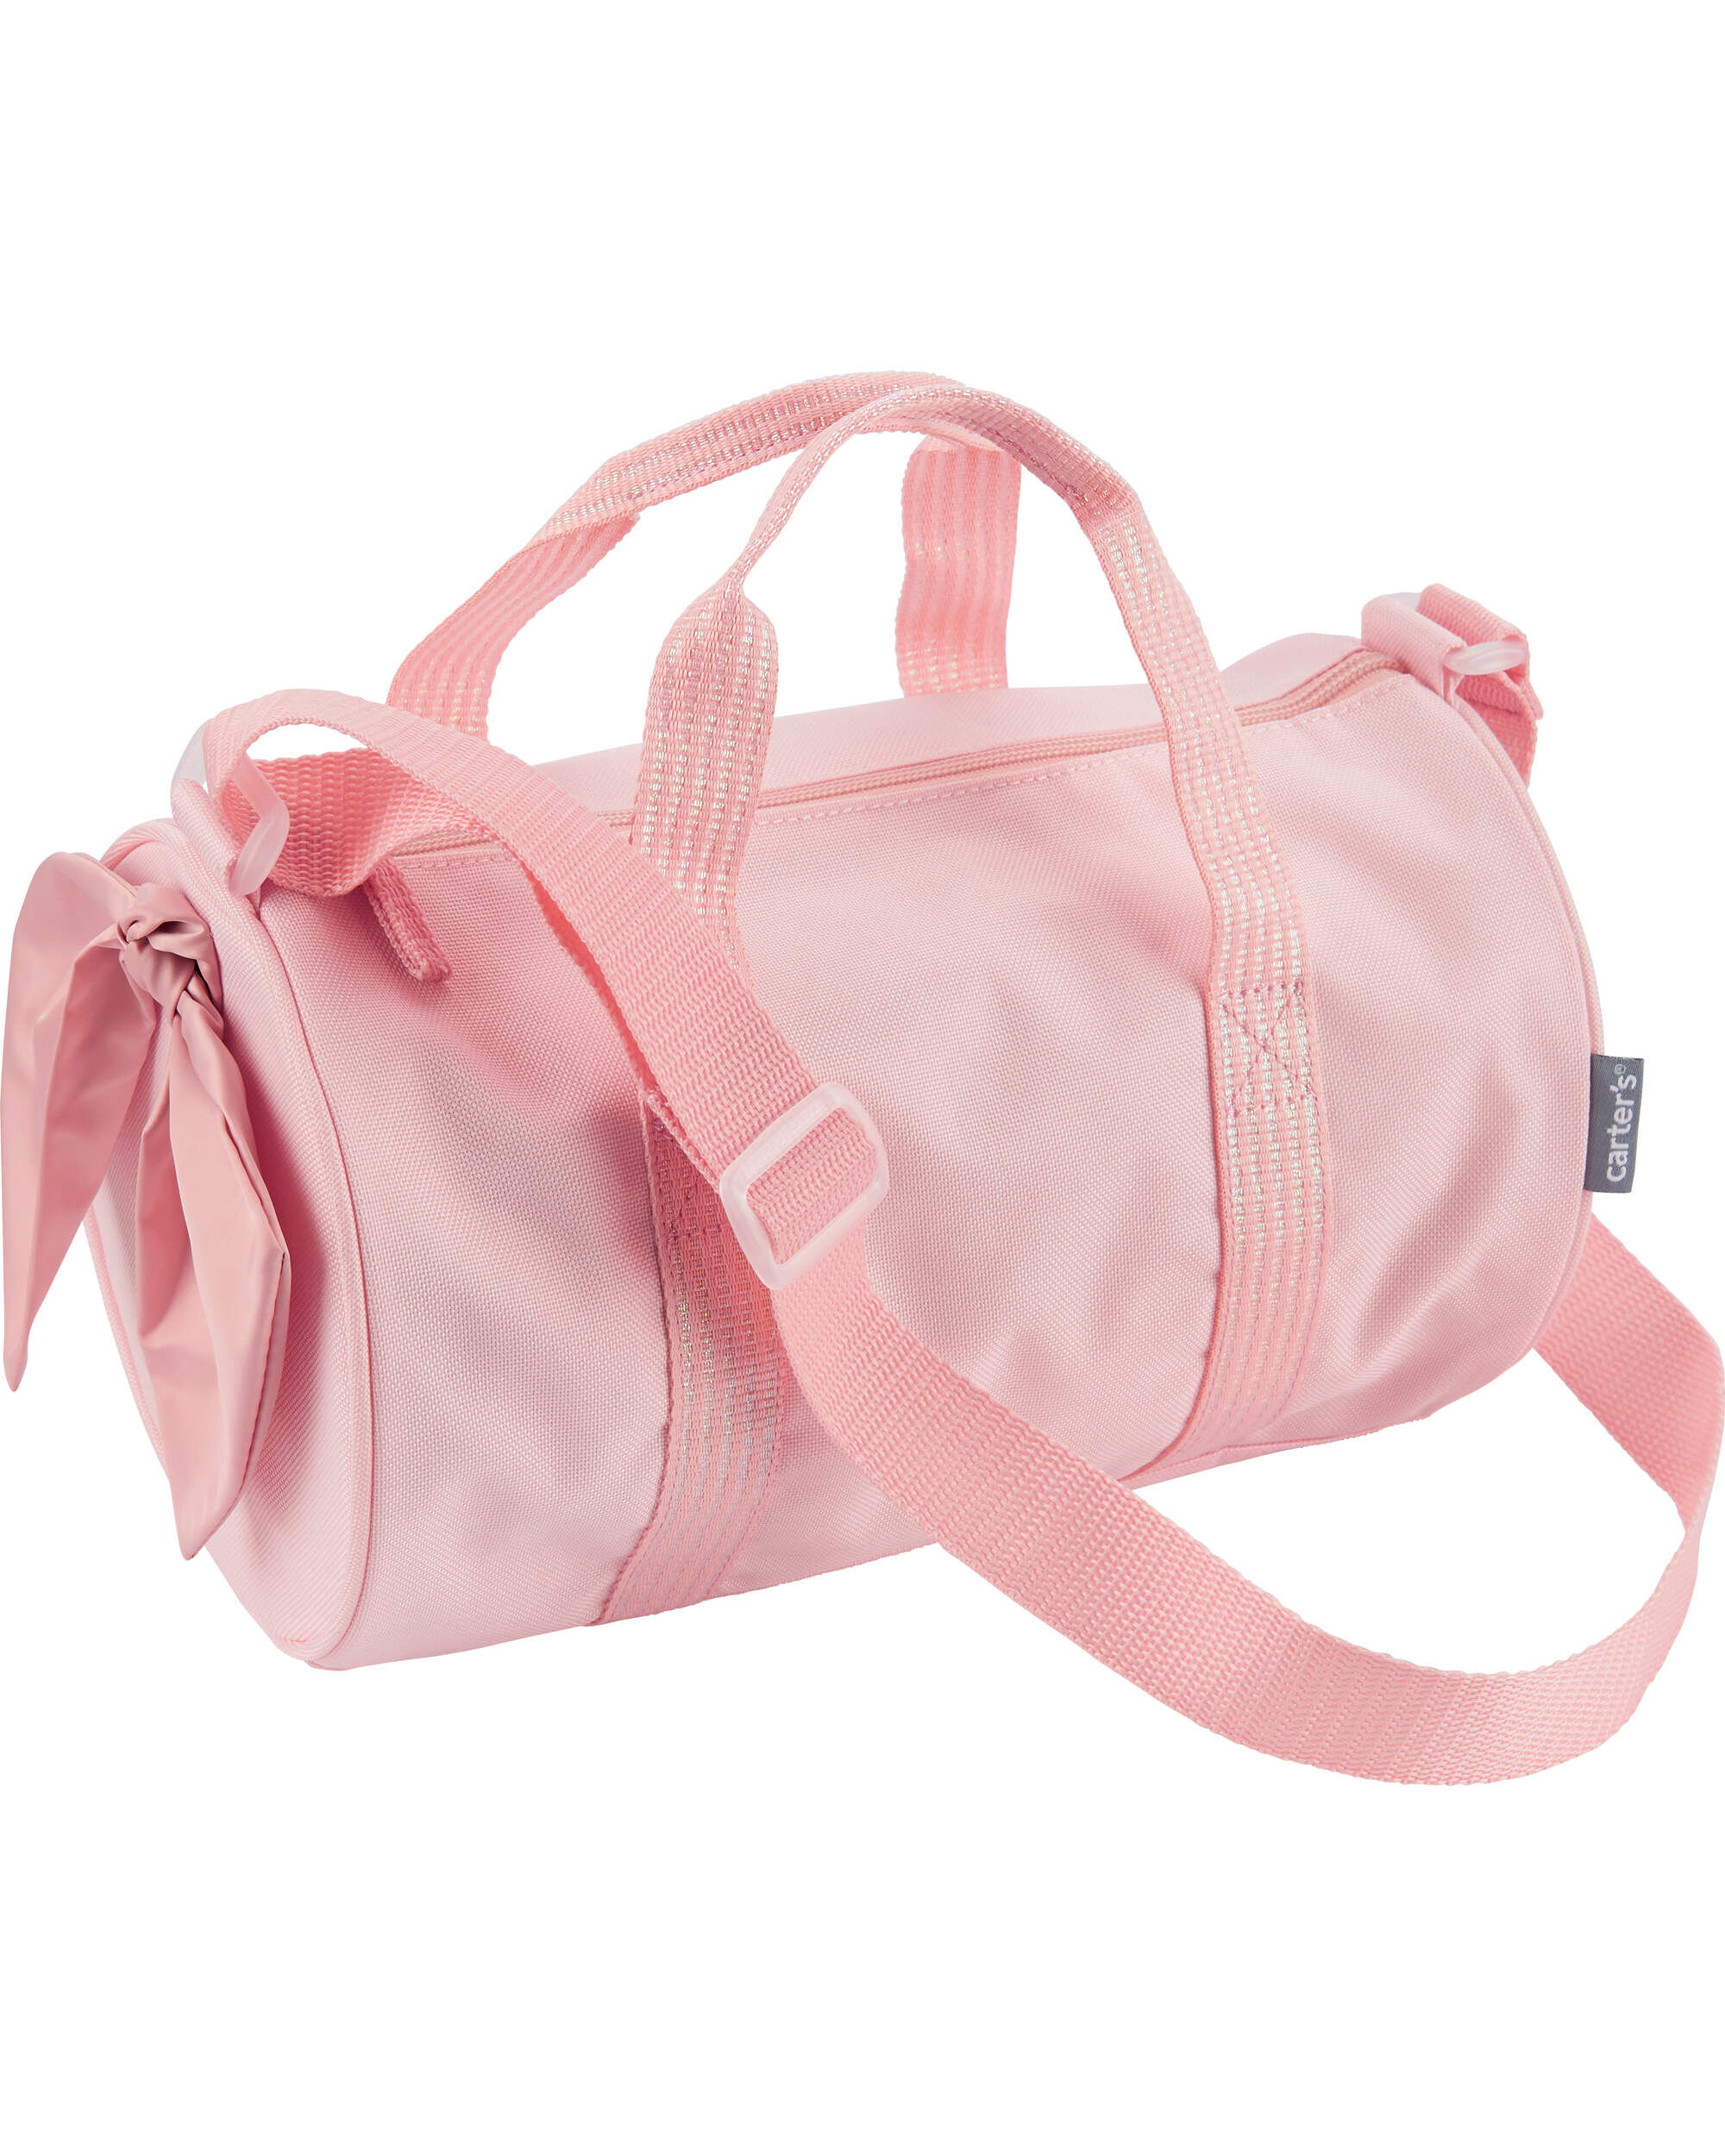 Waterproof Pink Gym Bag for Women with Shoe Compartment and Trolley Sleeve,  I... | eBay